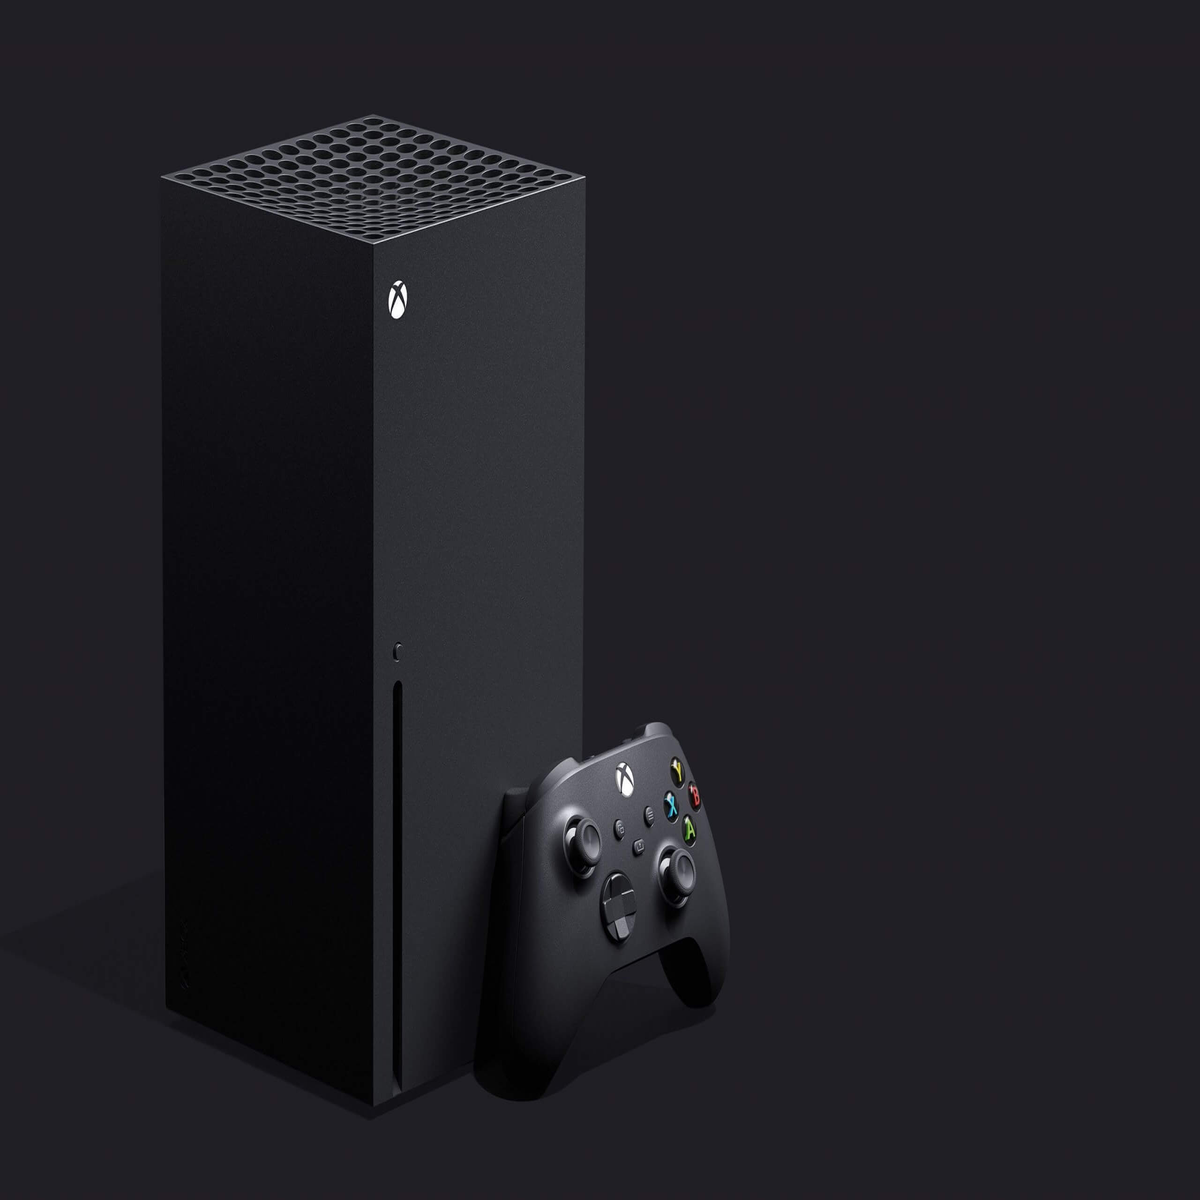 2021 looks very promising for Xbox (Updated)